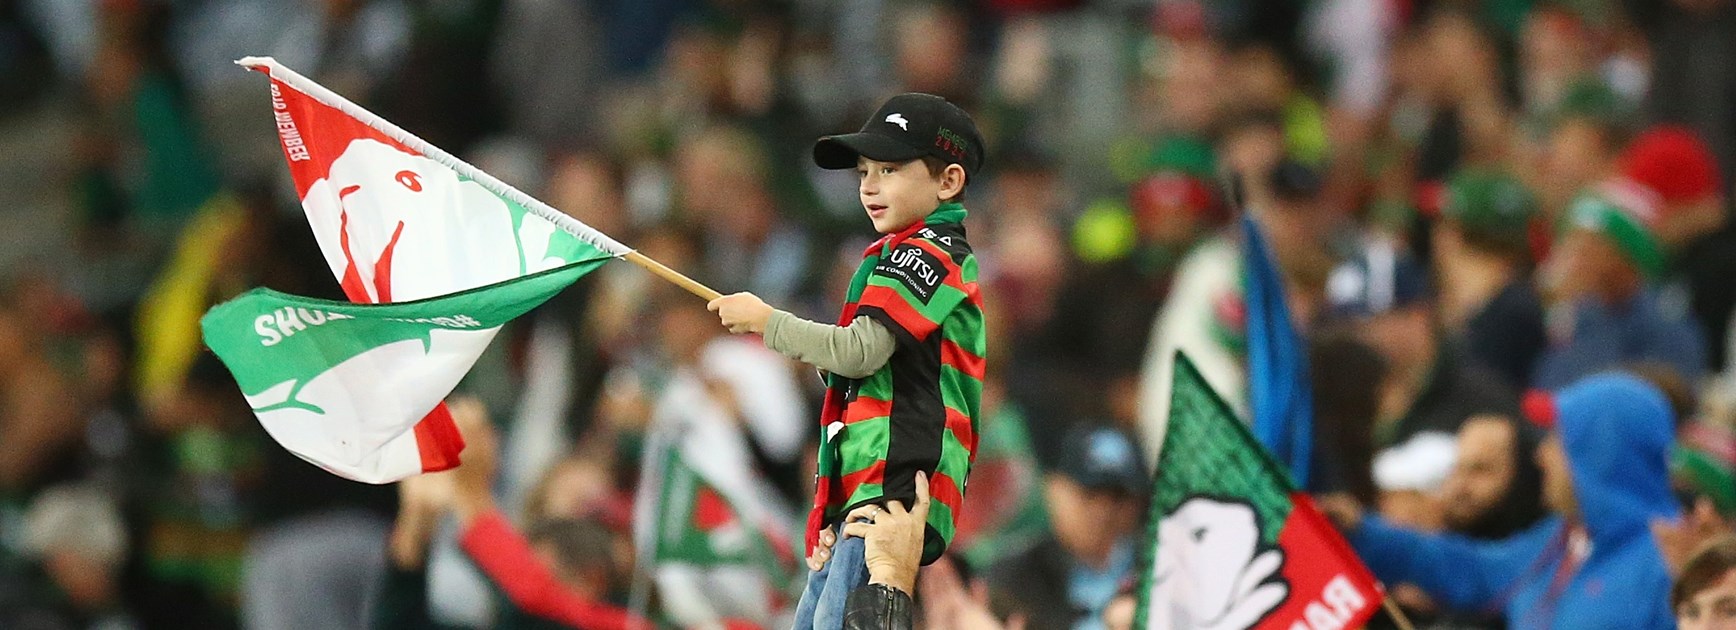 A young Rabbitohs fan.